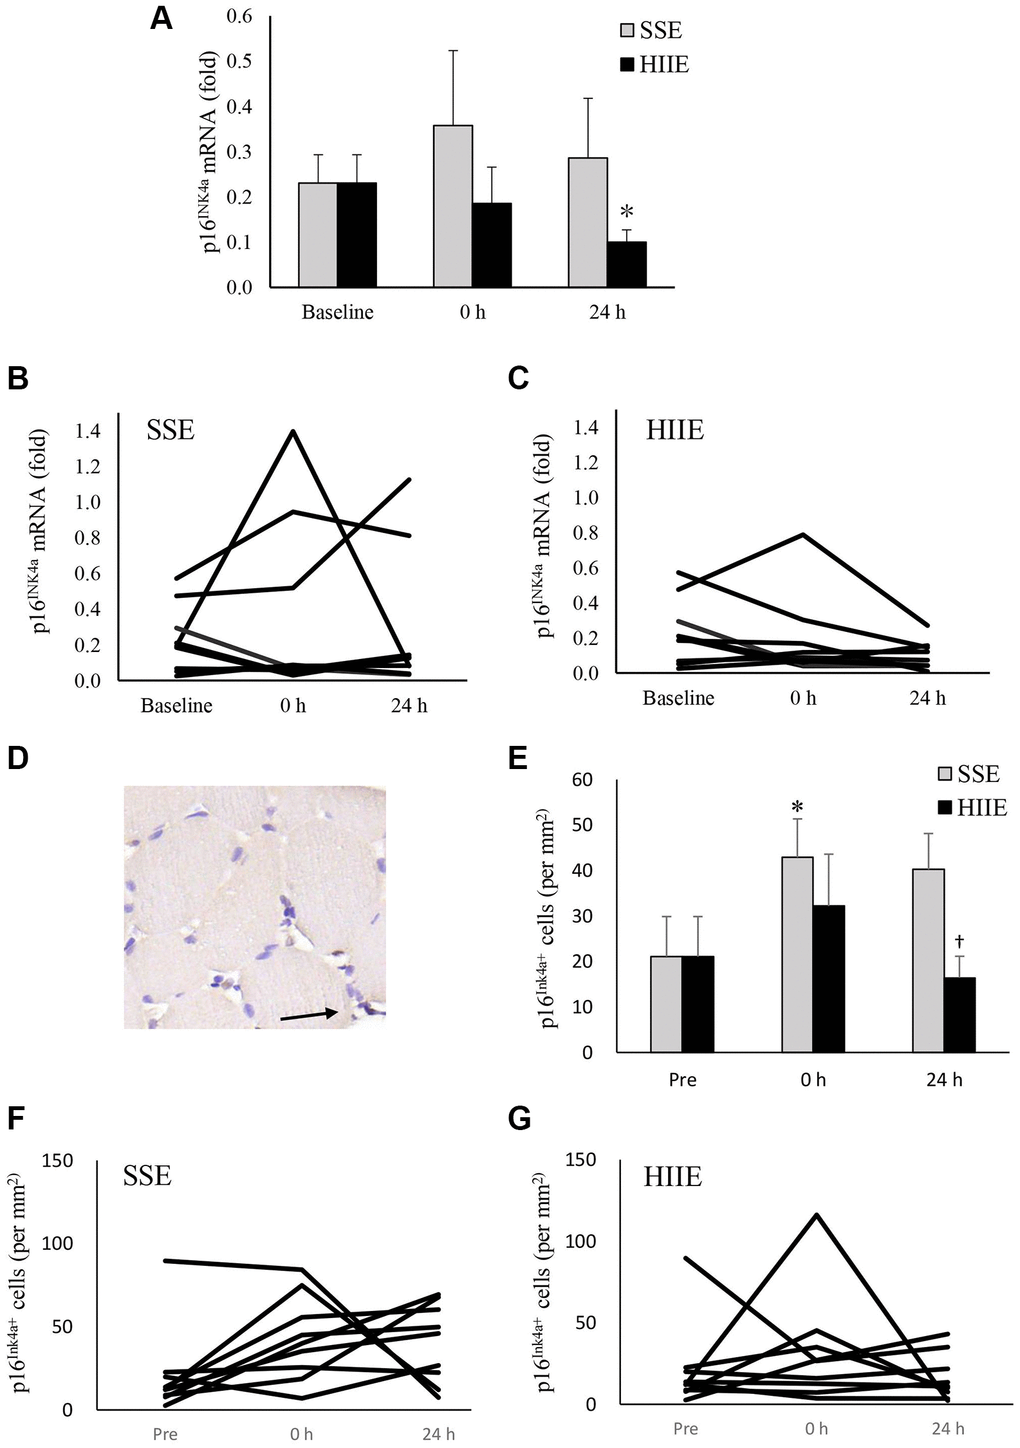 p16INK4a mRNA in human skeletal muscle 24 h after SSE and HIIE. The cellular senescence marker p16INK4a mRNA decreased 24 h after HIIE (d = 0.90, p = 0.04), whilst no change was observed after SSE at similar amount of cycling work (A). Individual responses in p16INK4a mRNA to SSE and HIIE are shown in (B and C), respectively. p16INK4a-expressing cells (representing all replicable cells) were located outsides myofibers, indicated by an arrow to brown precipitates (D). p16INK4a-expression cells (replicable cells) increased immediately after HIIE and returned to baseline in 24 h (E). Individual responses to SSE and HIIE are shown in (F and G), respectively. *Significant difference against pre-exercise baseline, p †Significance against SSE, p 